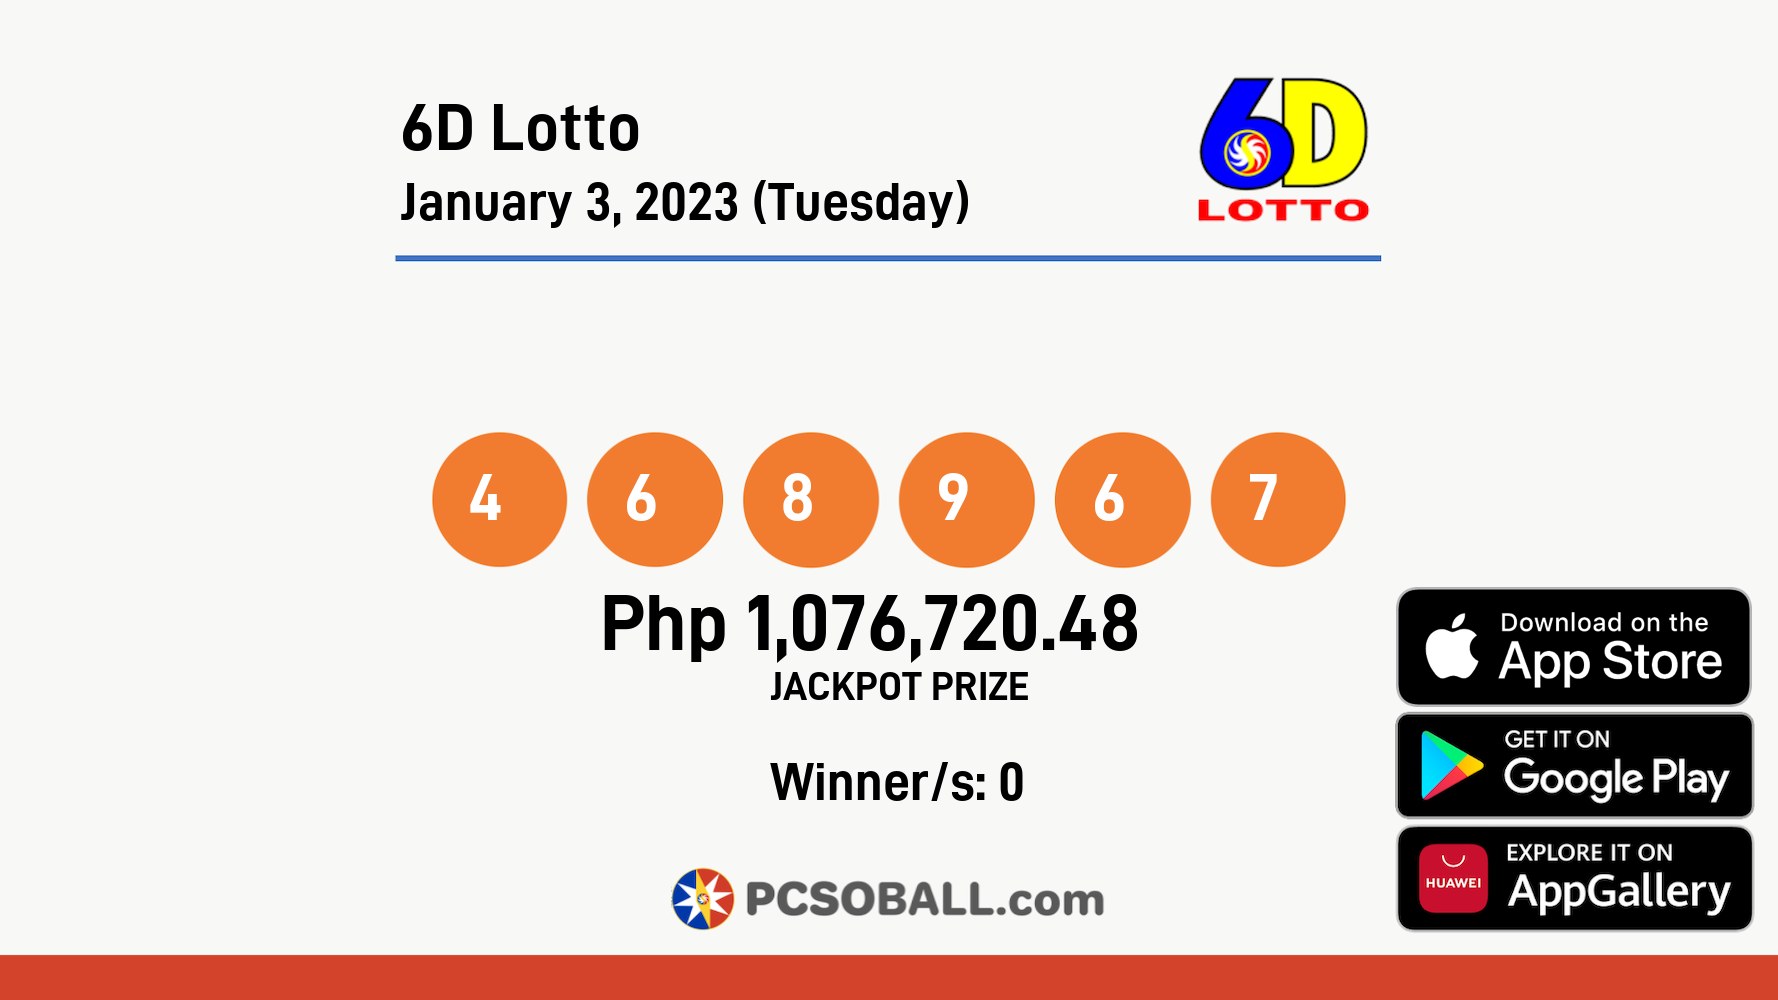 6D Lotto January 3, 2023 (Tuesday) Result